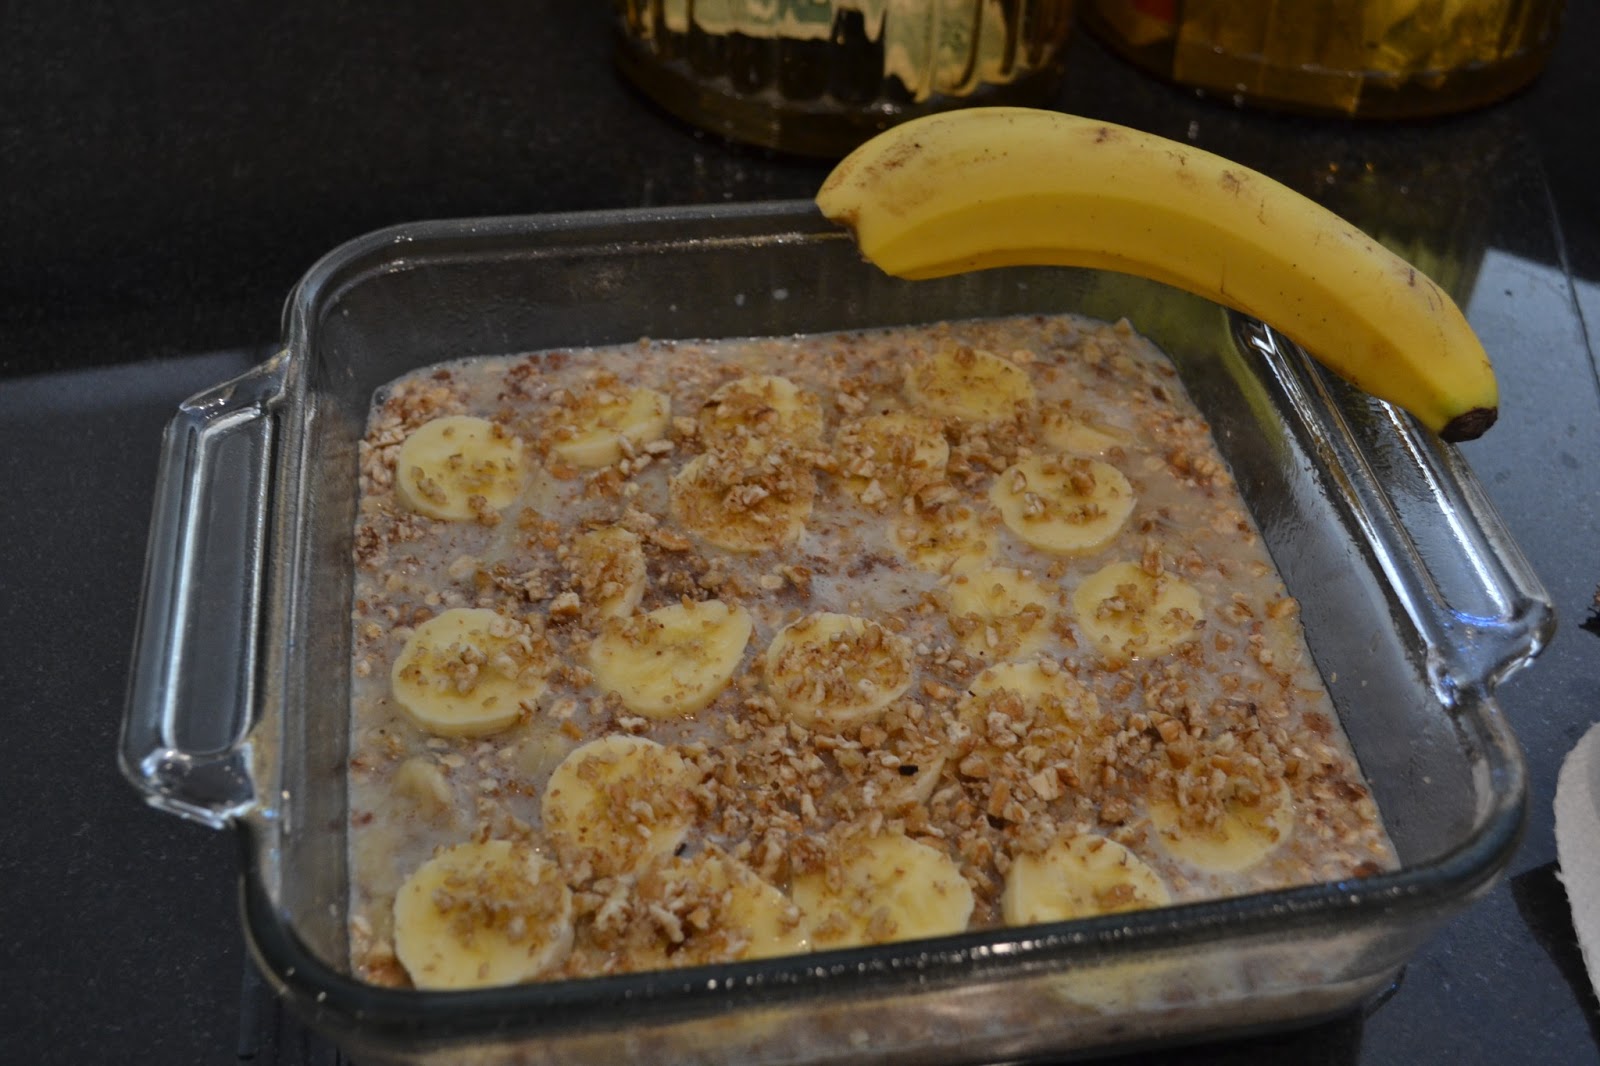 Southern Accents: Baked Banana Nut Oatmeal